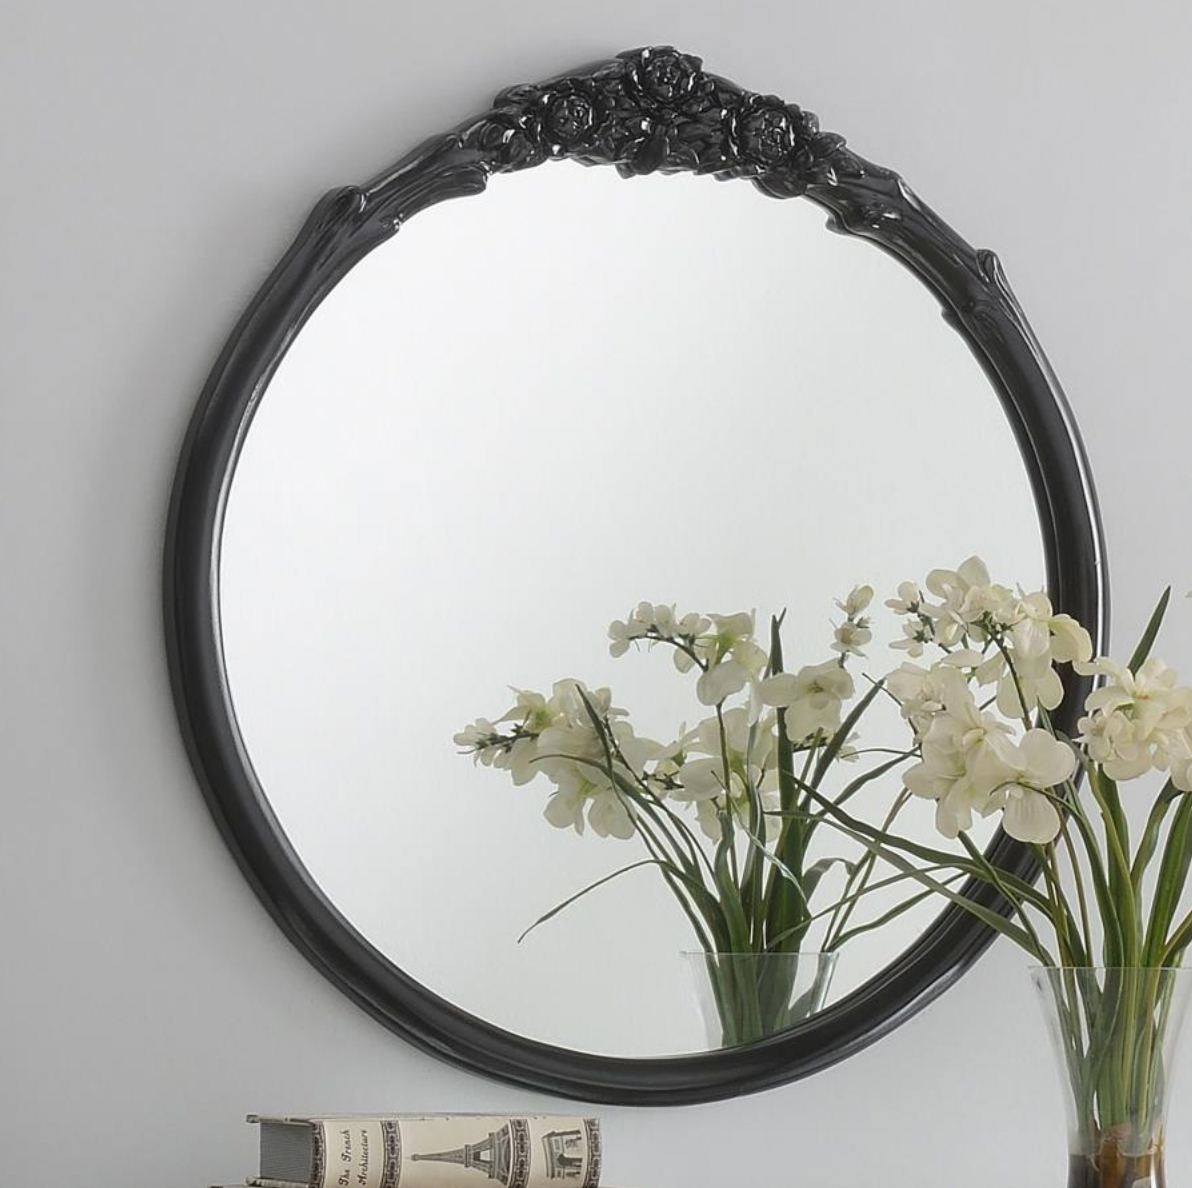 SLYVIE French Provincial Round Wall Mirror Black